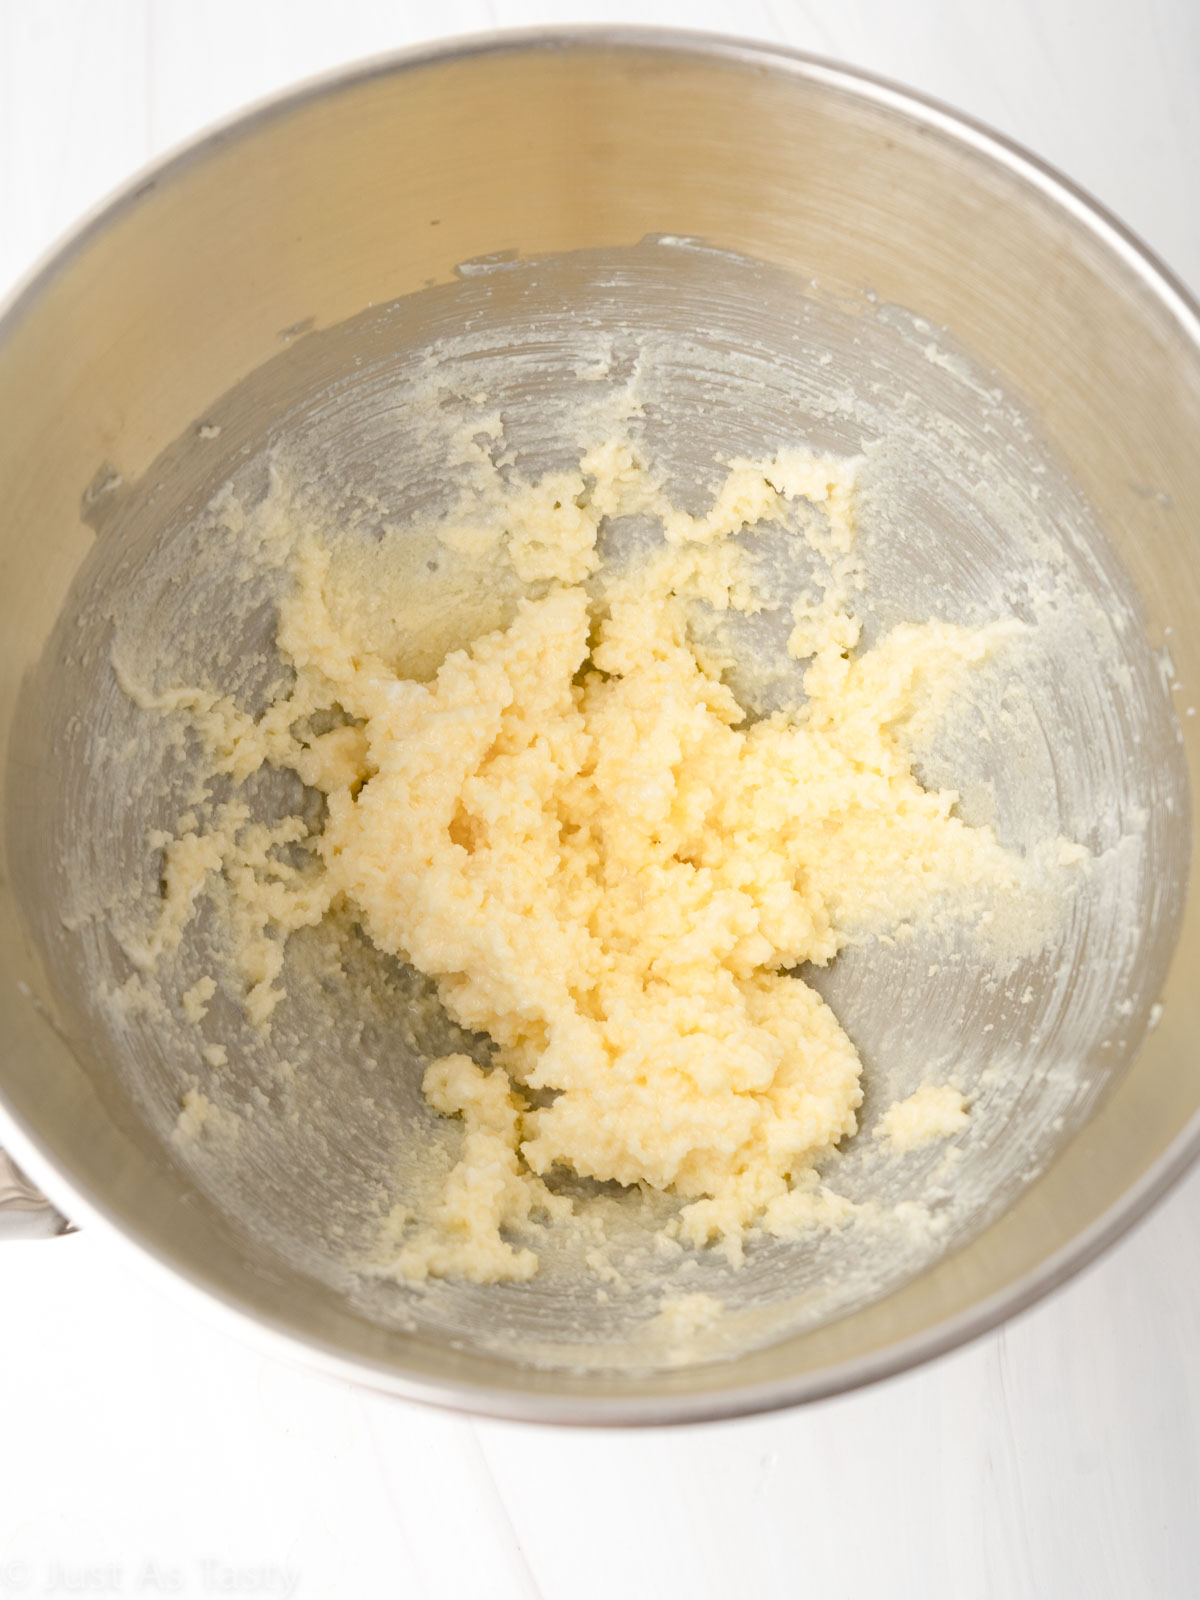 Wet ingredients in a mixing bowl.